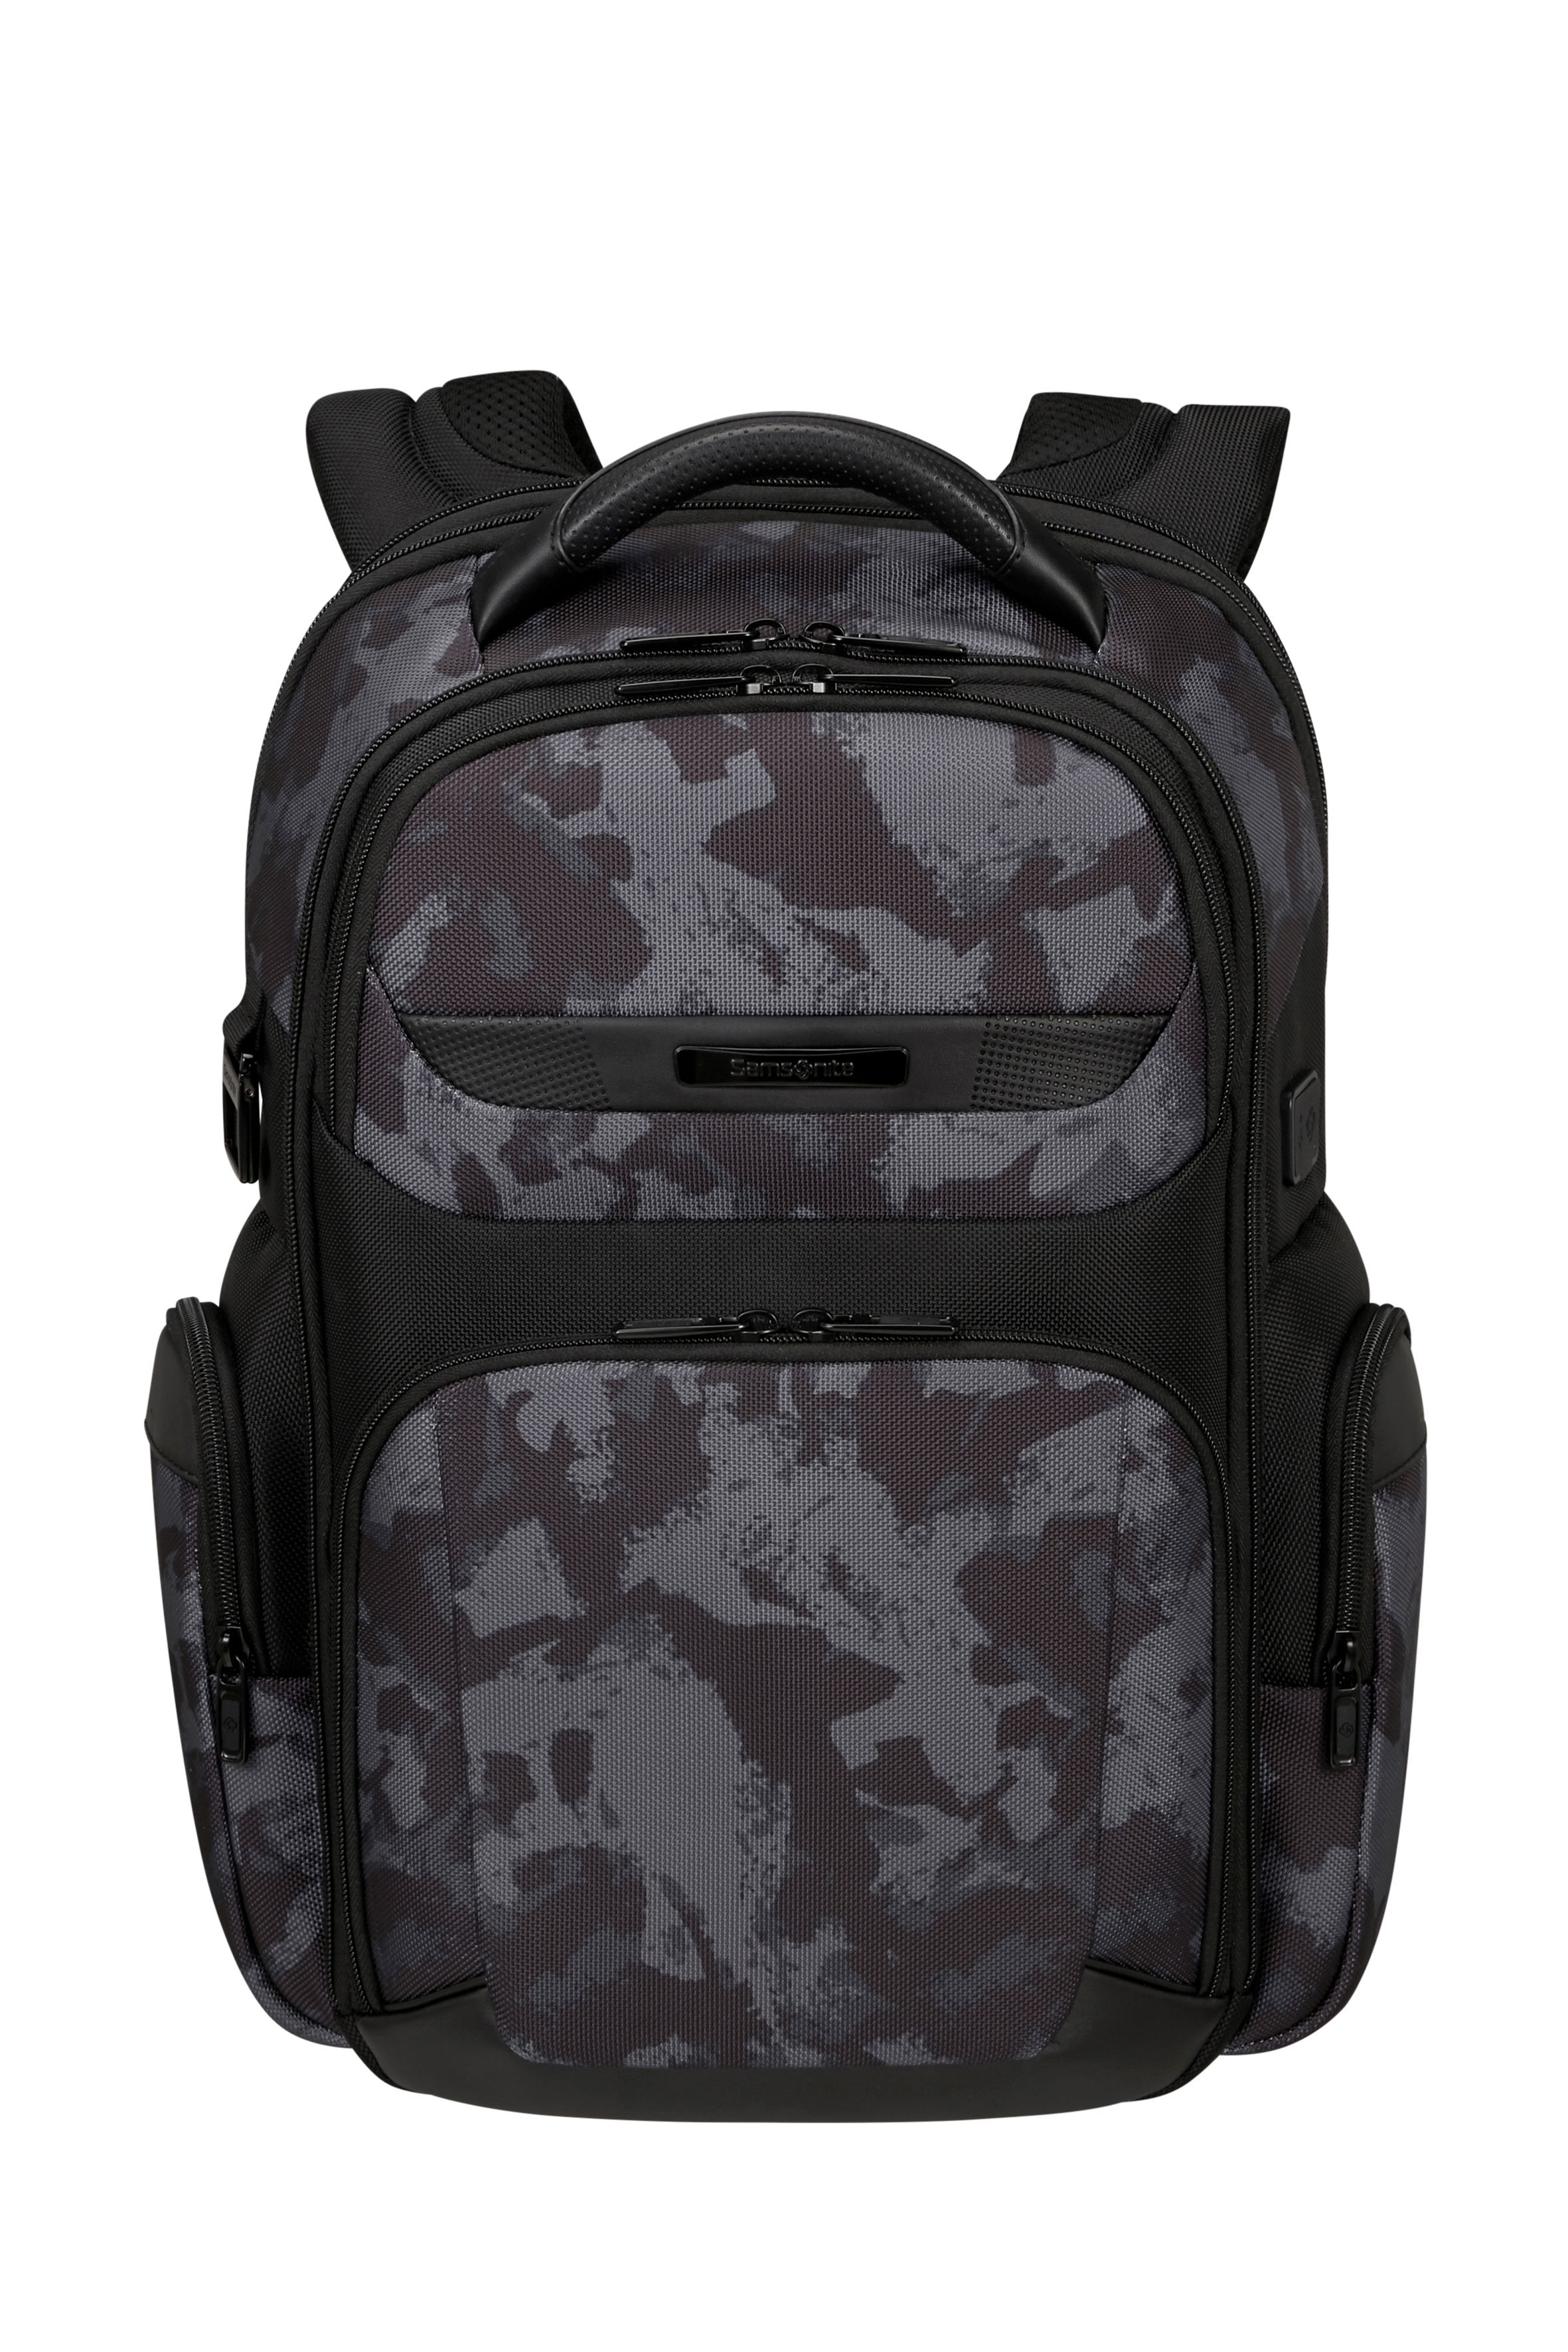 PRO-DLX 6 BACKPACK 15.6